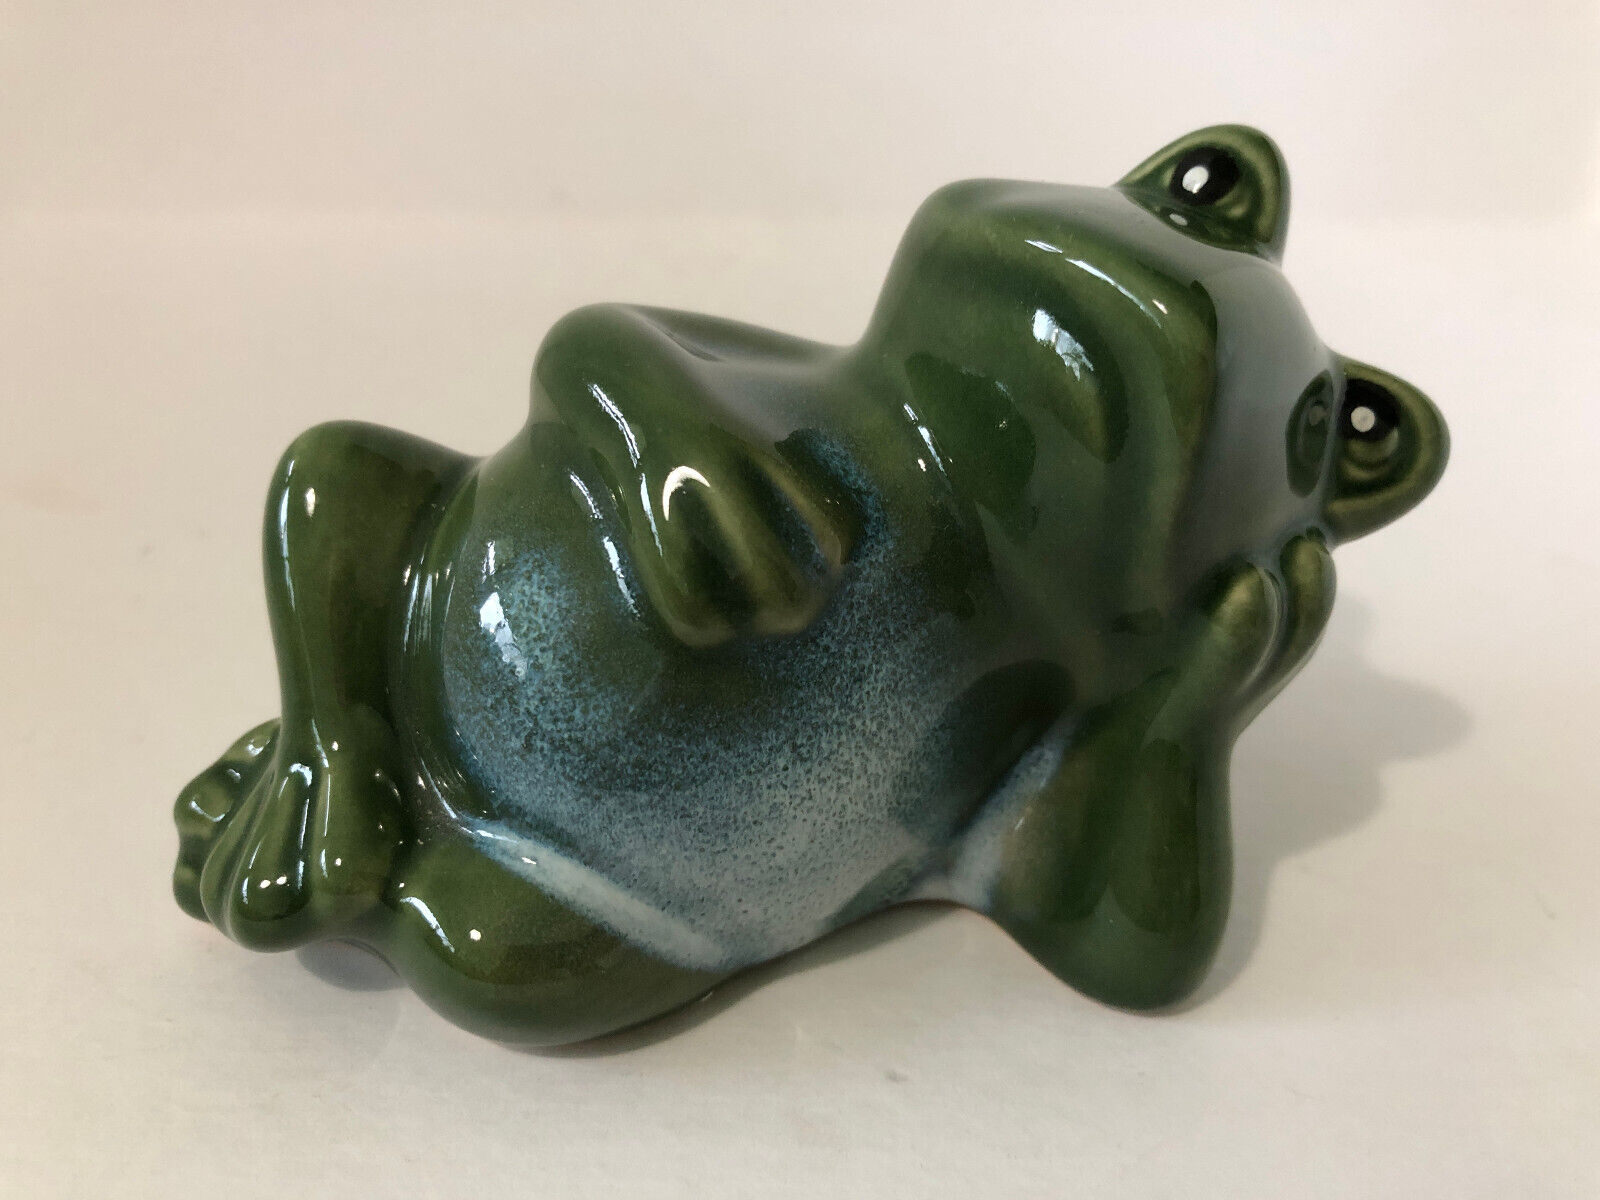 Whimsicle Reclining Frog Figurine, Vintage Ceramic by Greenbrier